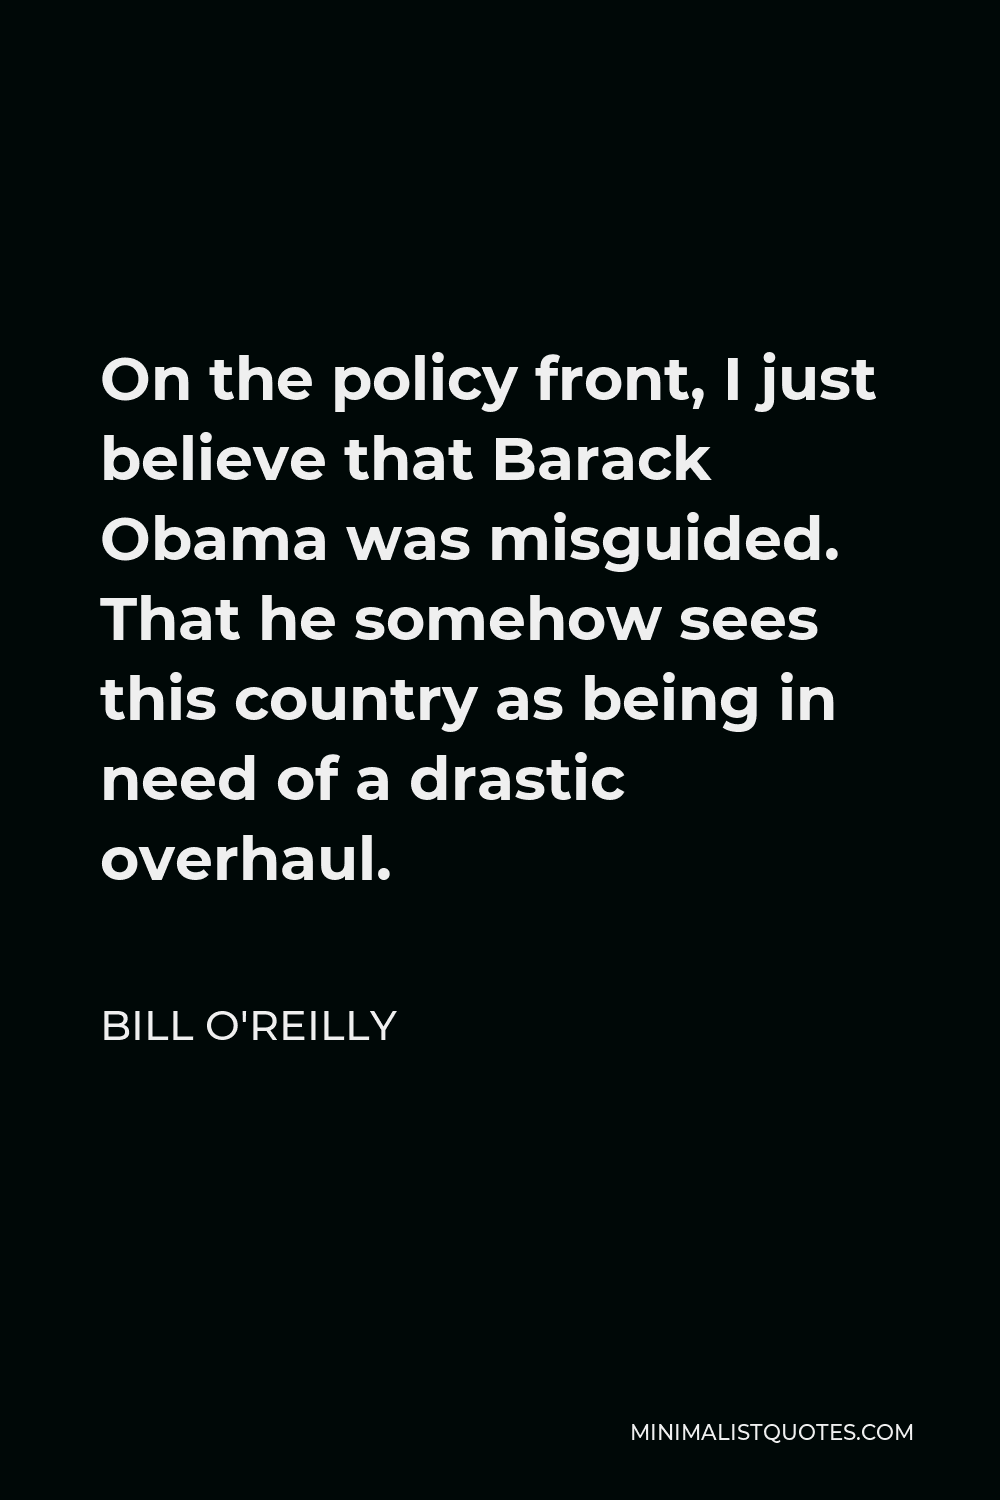 Bill O'Reilly Quote - On the policy front, I just believe that Barack Obama was misguided. That he somehow sees this country as being in need of a drastic overhaul.